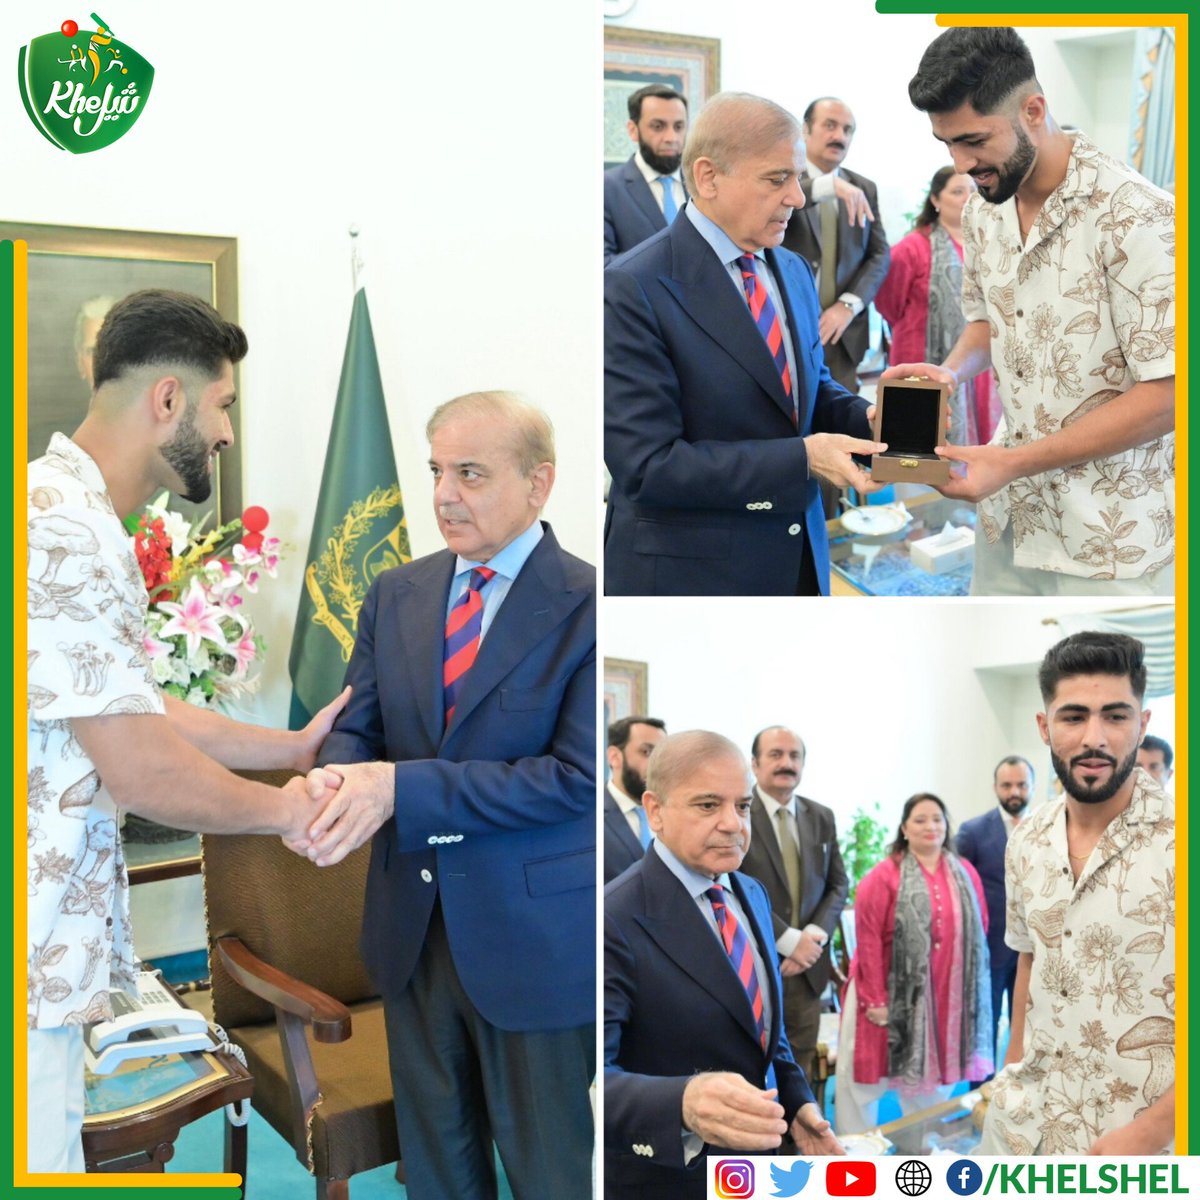 Shahzaib Rindh receives a token of appreciation from the Prime Minister of Pakistan on his meet up in Lahore. #Karate | #Pakistan | #ShahzaibRindh | #Lahore | #Athlete | #Fighter